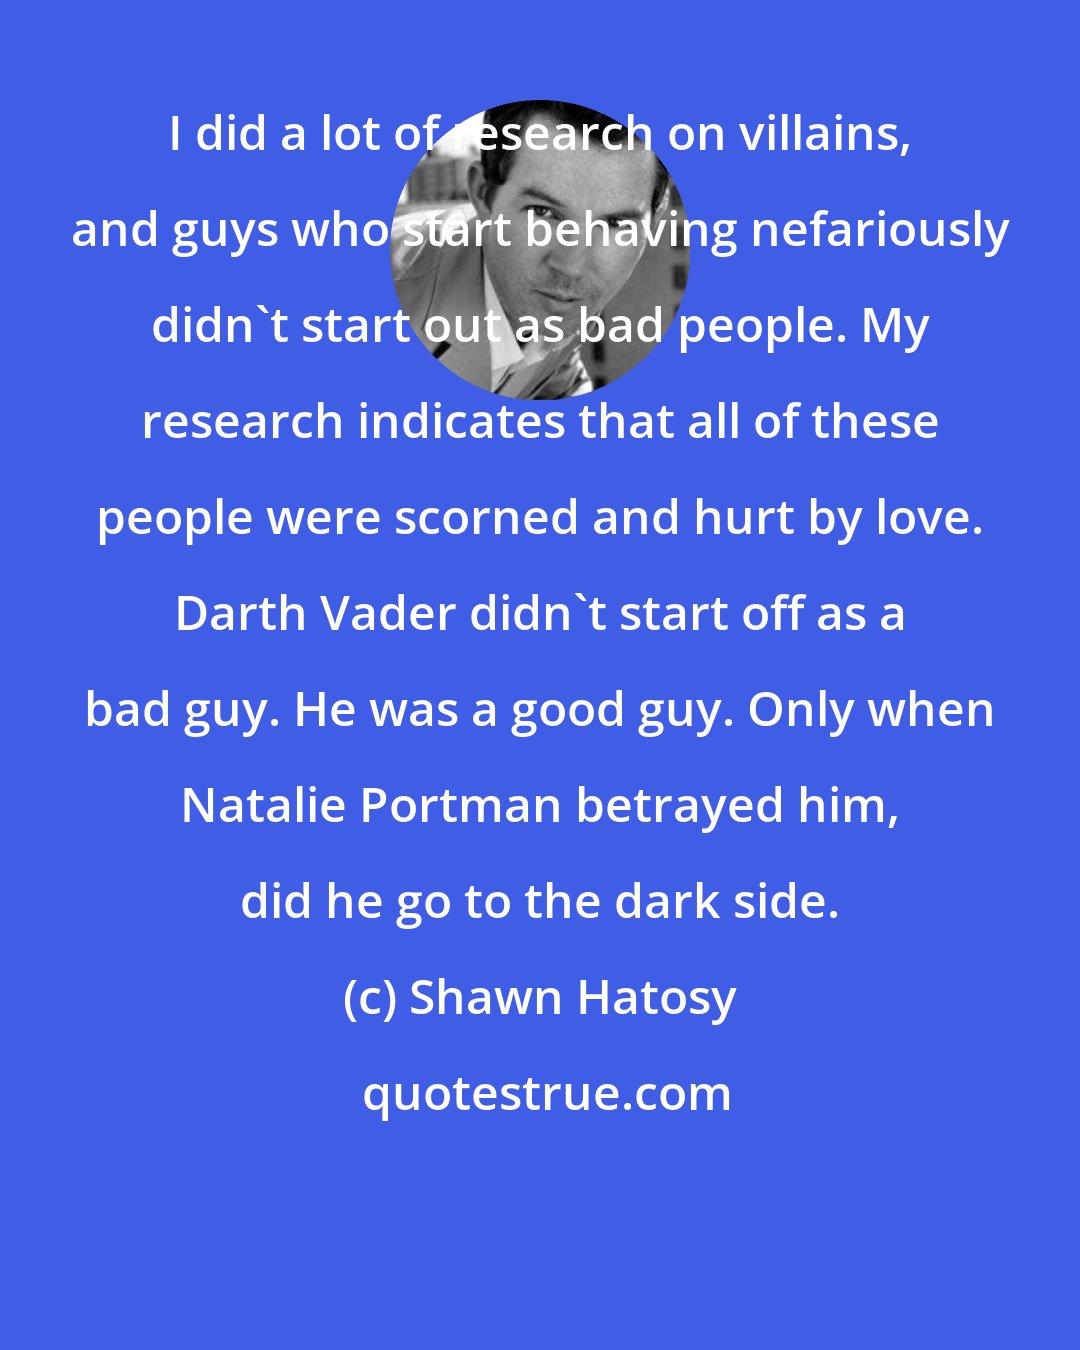 Shawn Hatosy: I did a lot of research on villains, and guys who start behaving nefariously didn't start out as bad people. My research indicates that all of these people were scorned and hurt by love. Darth Vader didn't start off as a bad guy. He was a good guy. Only when Natalie Portman betrayed him, did he go to the dark side.